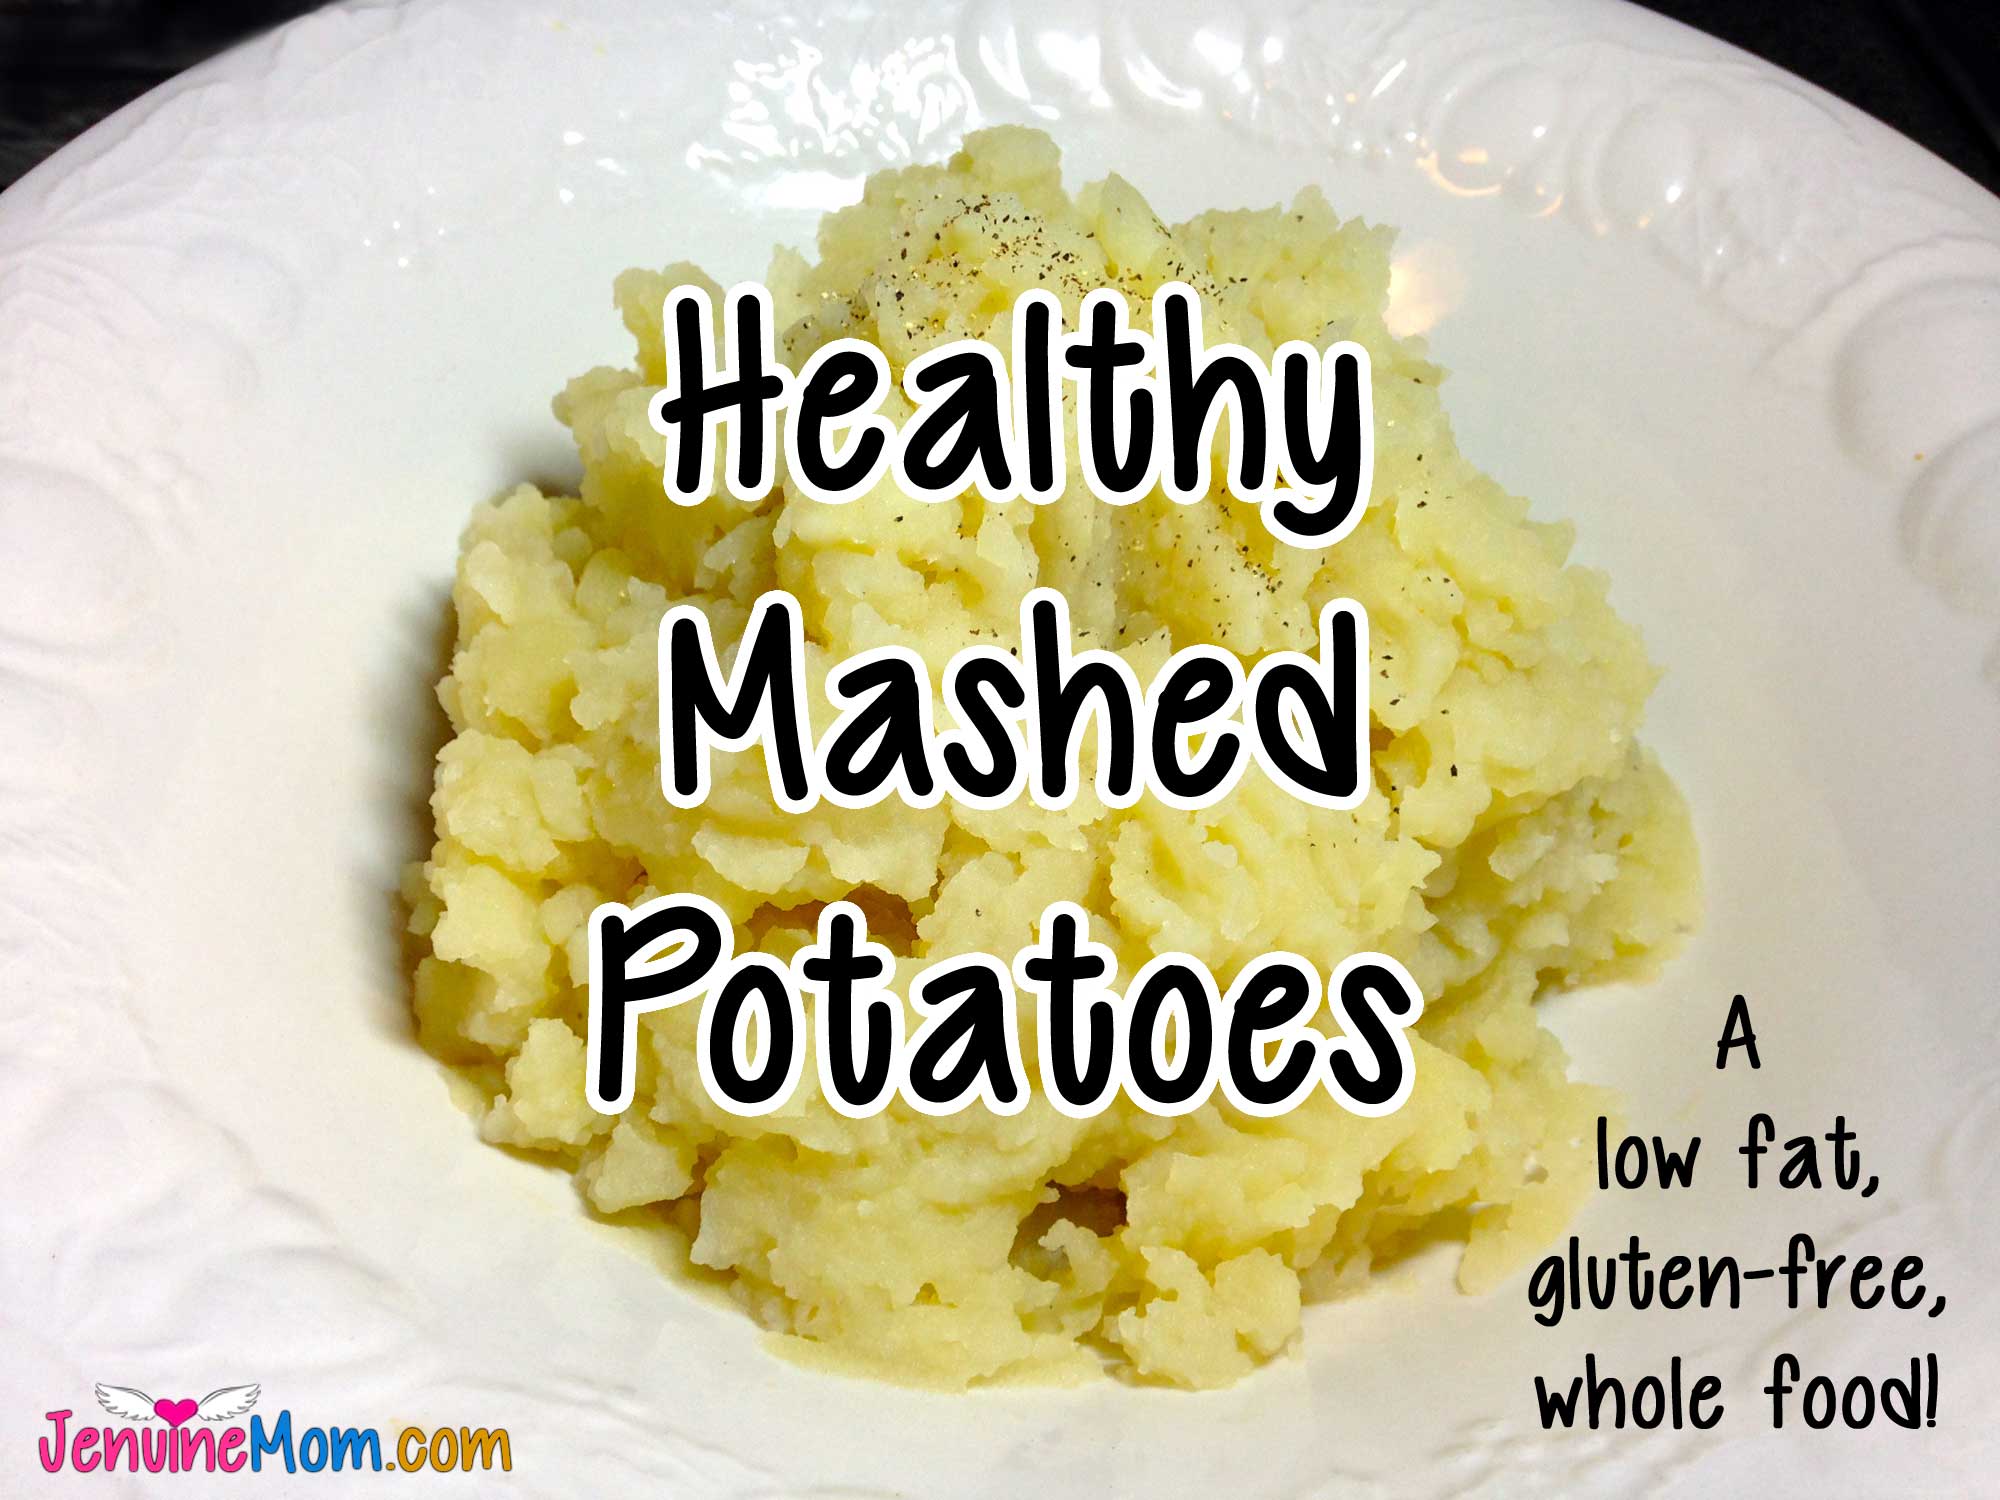 Healthy Mashed Potatoes: A Delicious, Low-Fat, Gluten-Free, Whole Food!